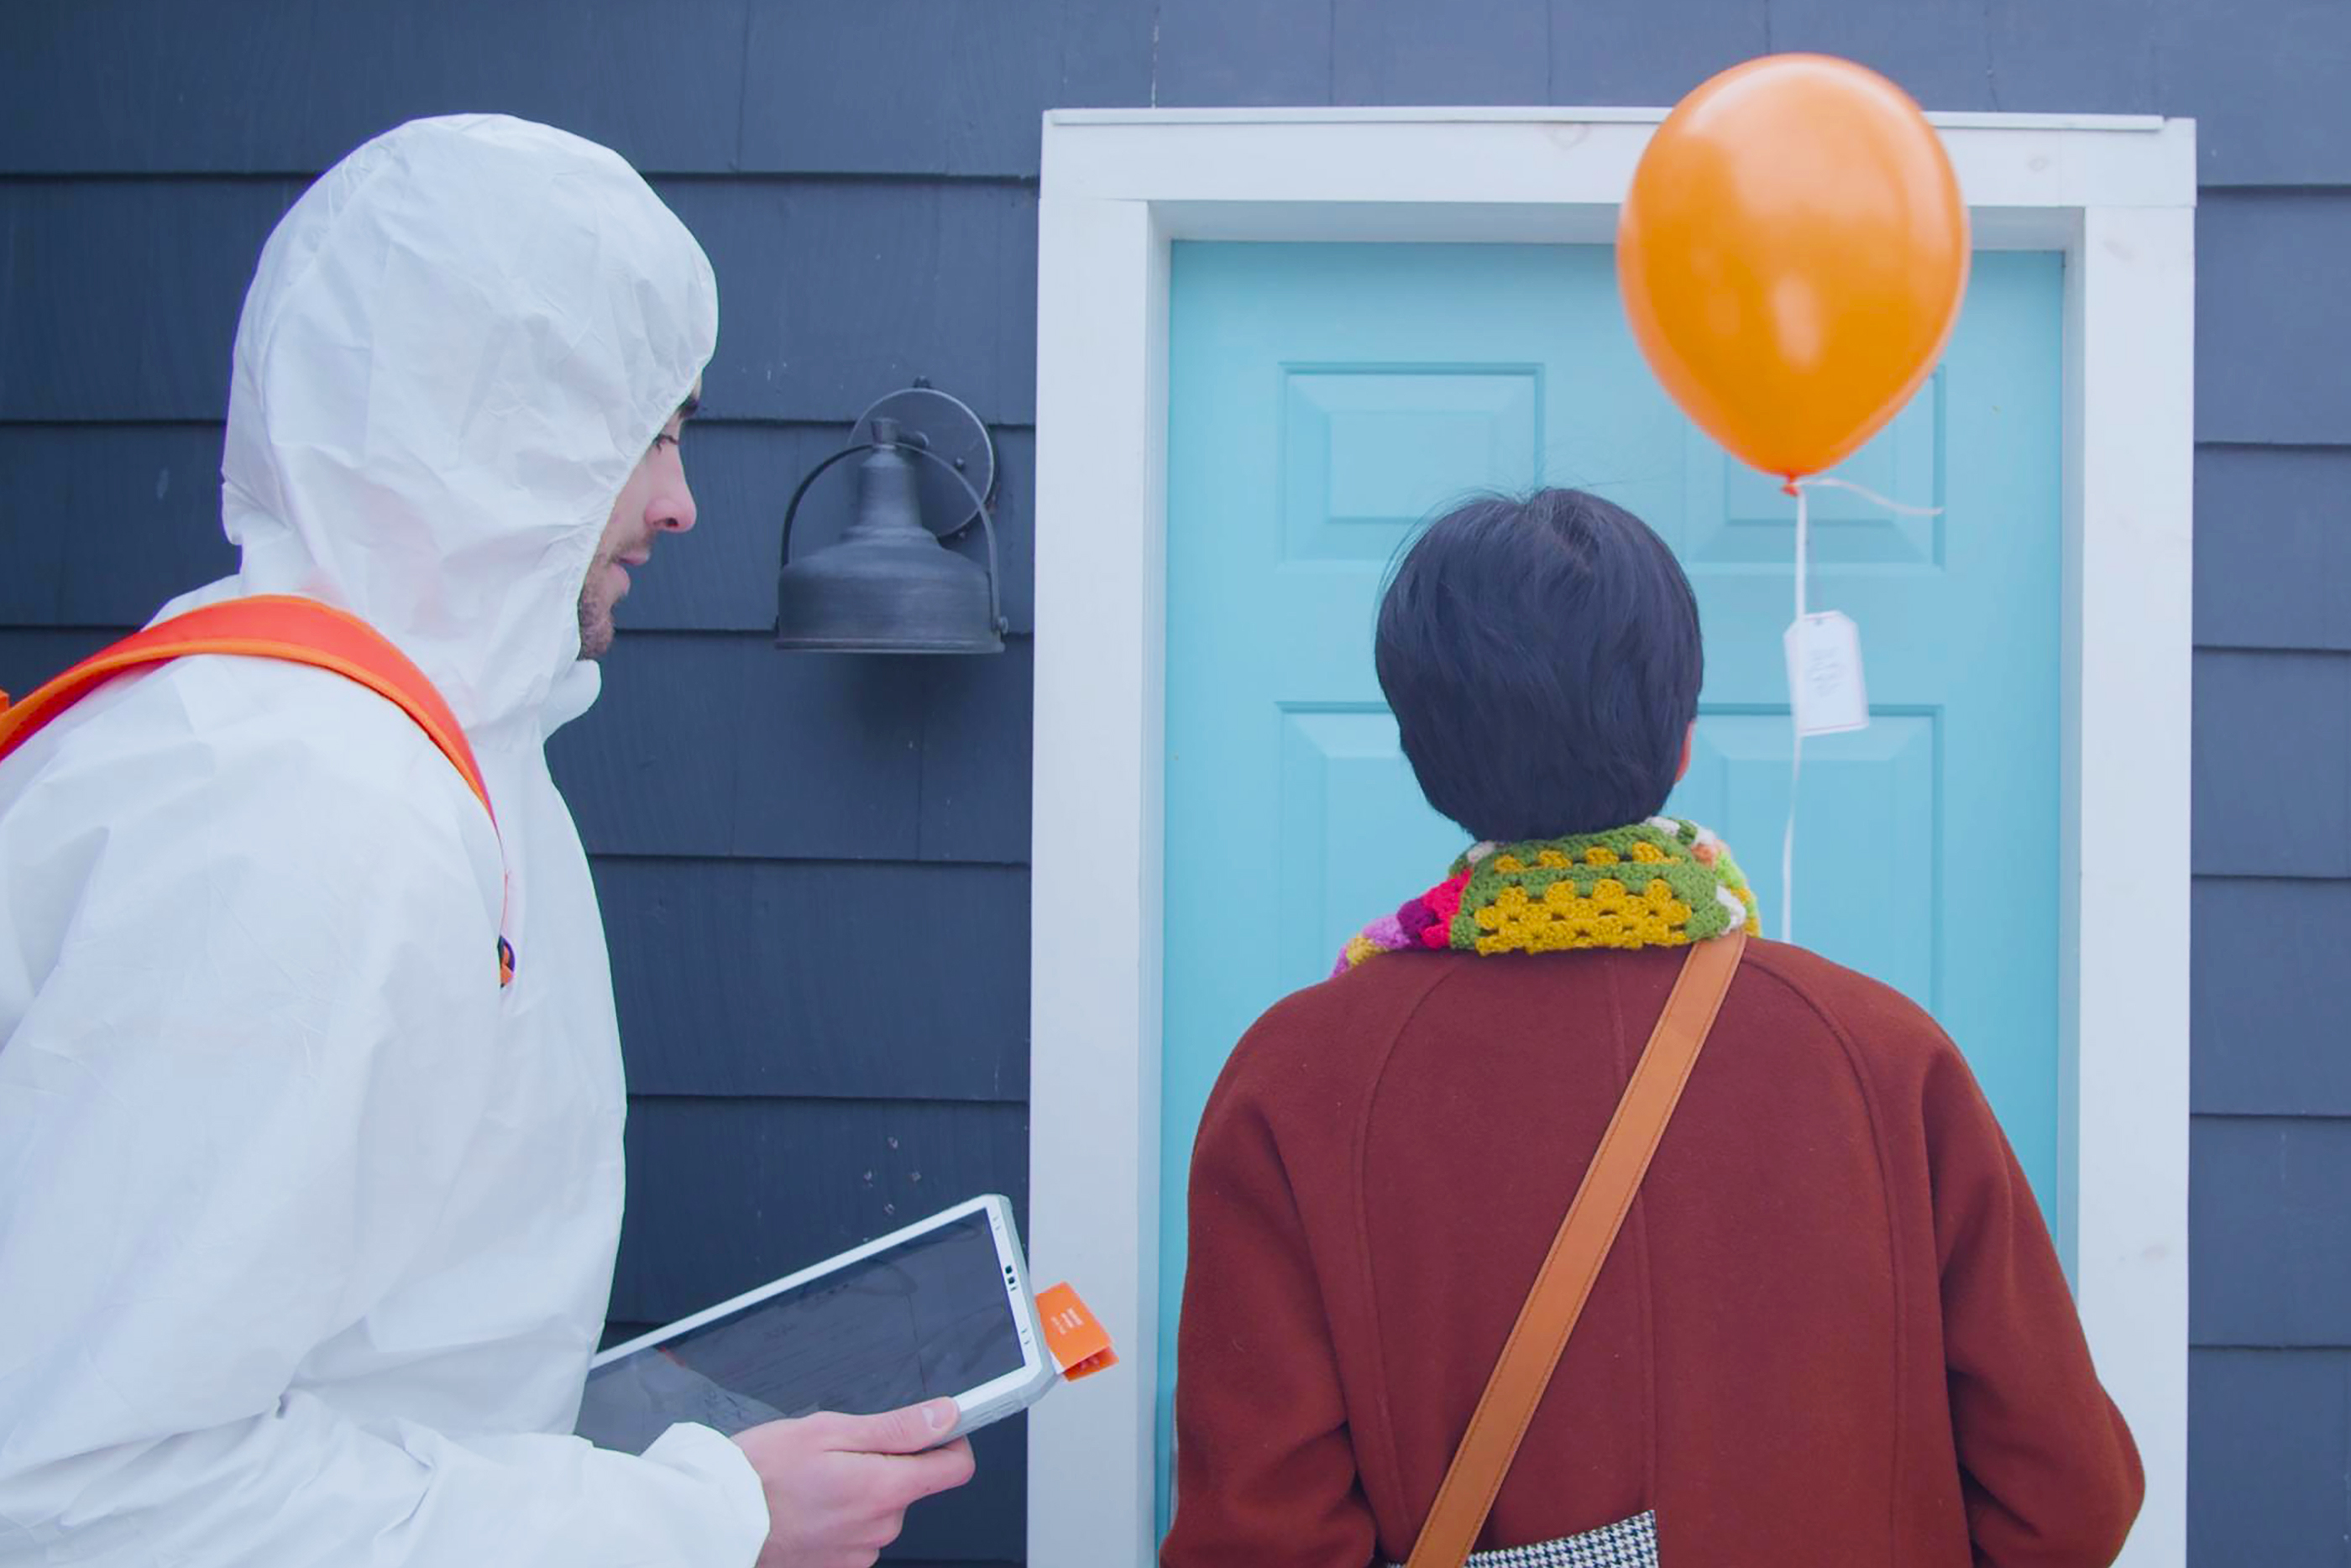 a woman with an orange balloon stands at the doorway